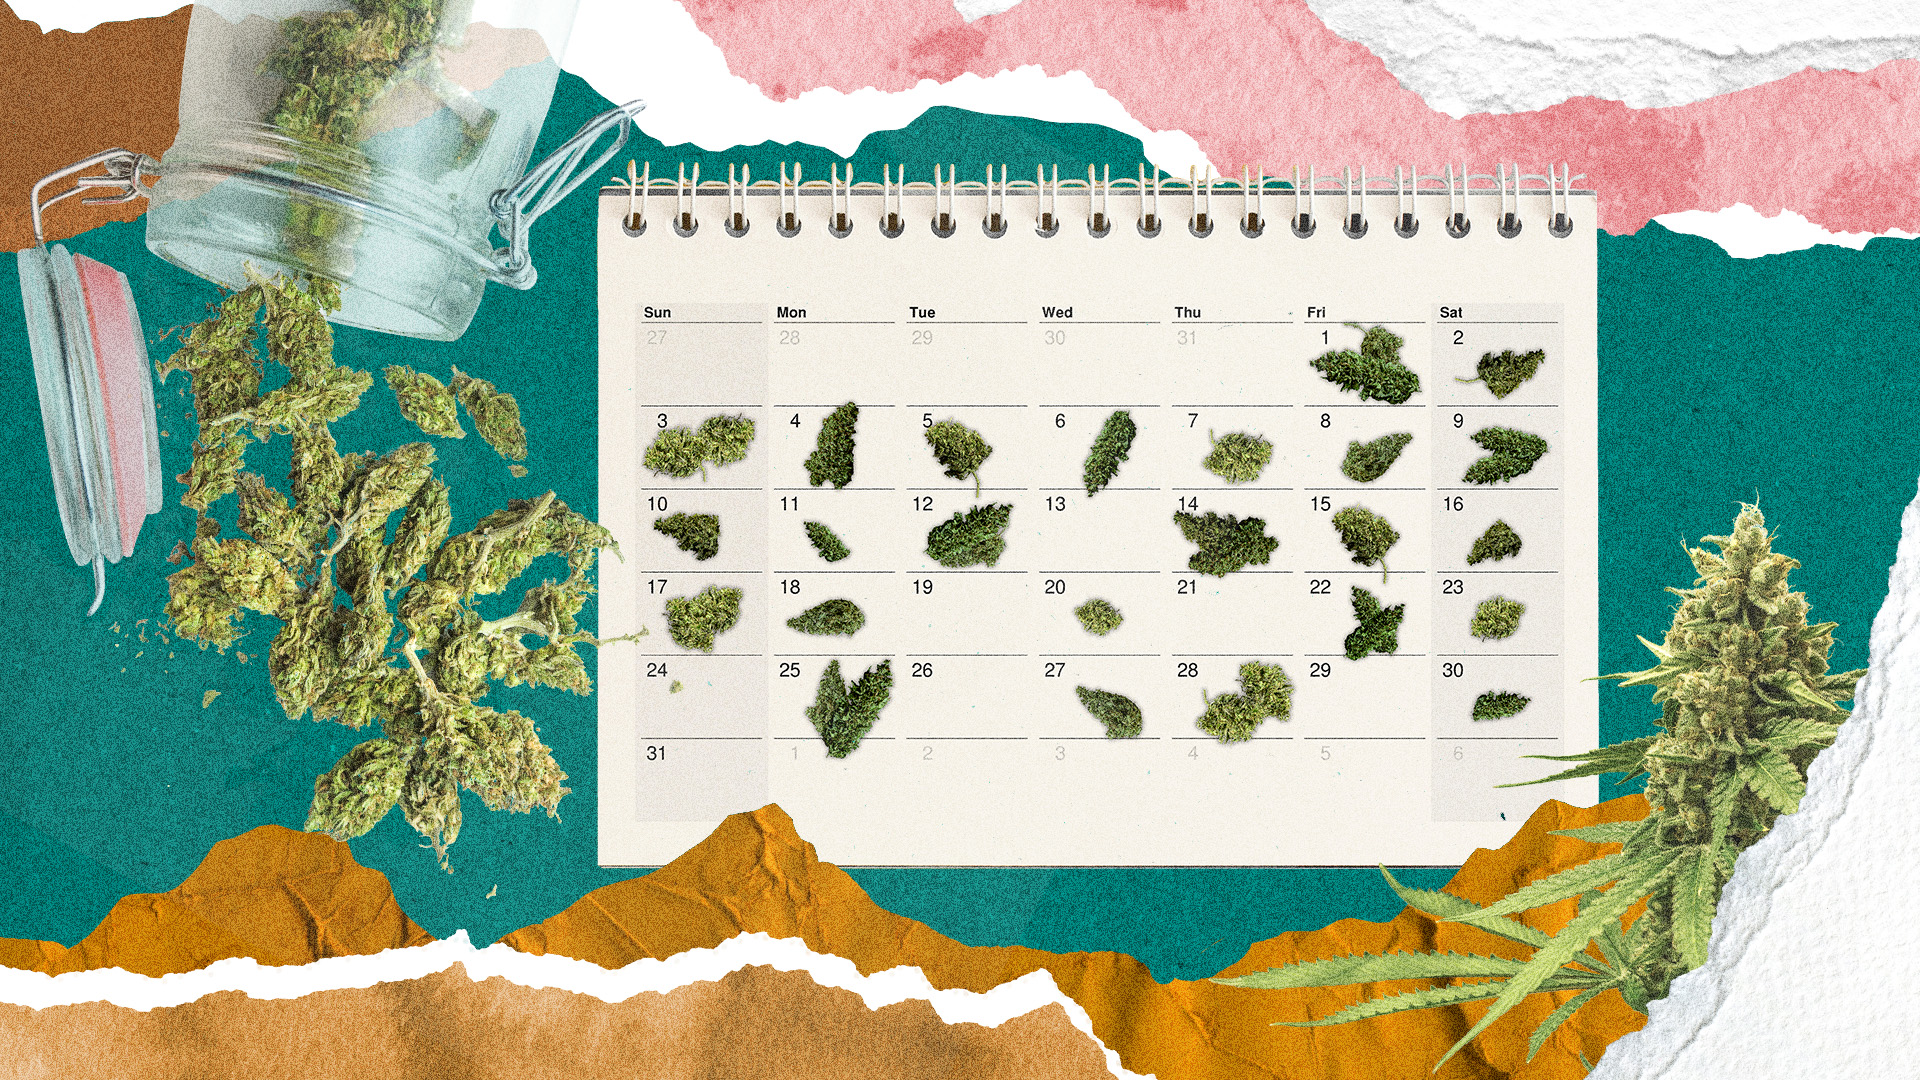 Stretch Your Stash: How To Make Weed Last Longer